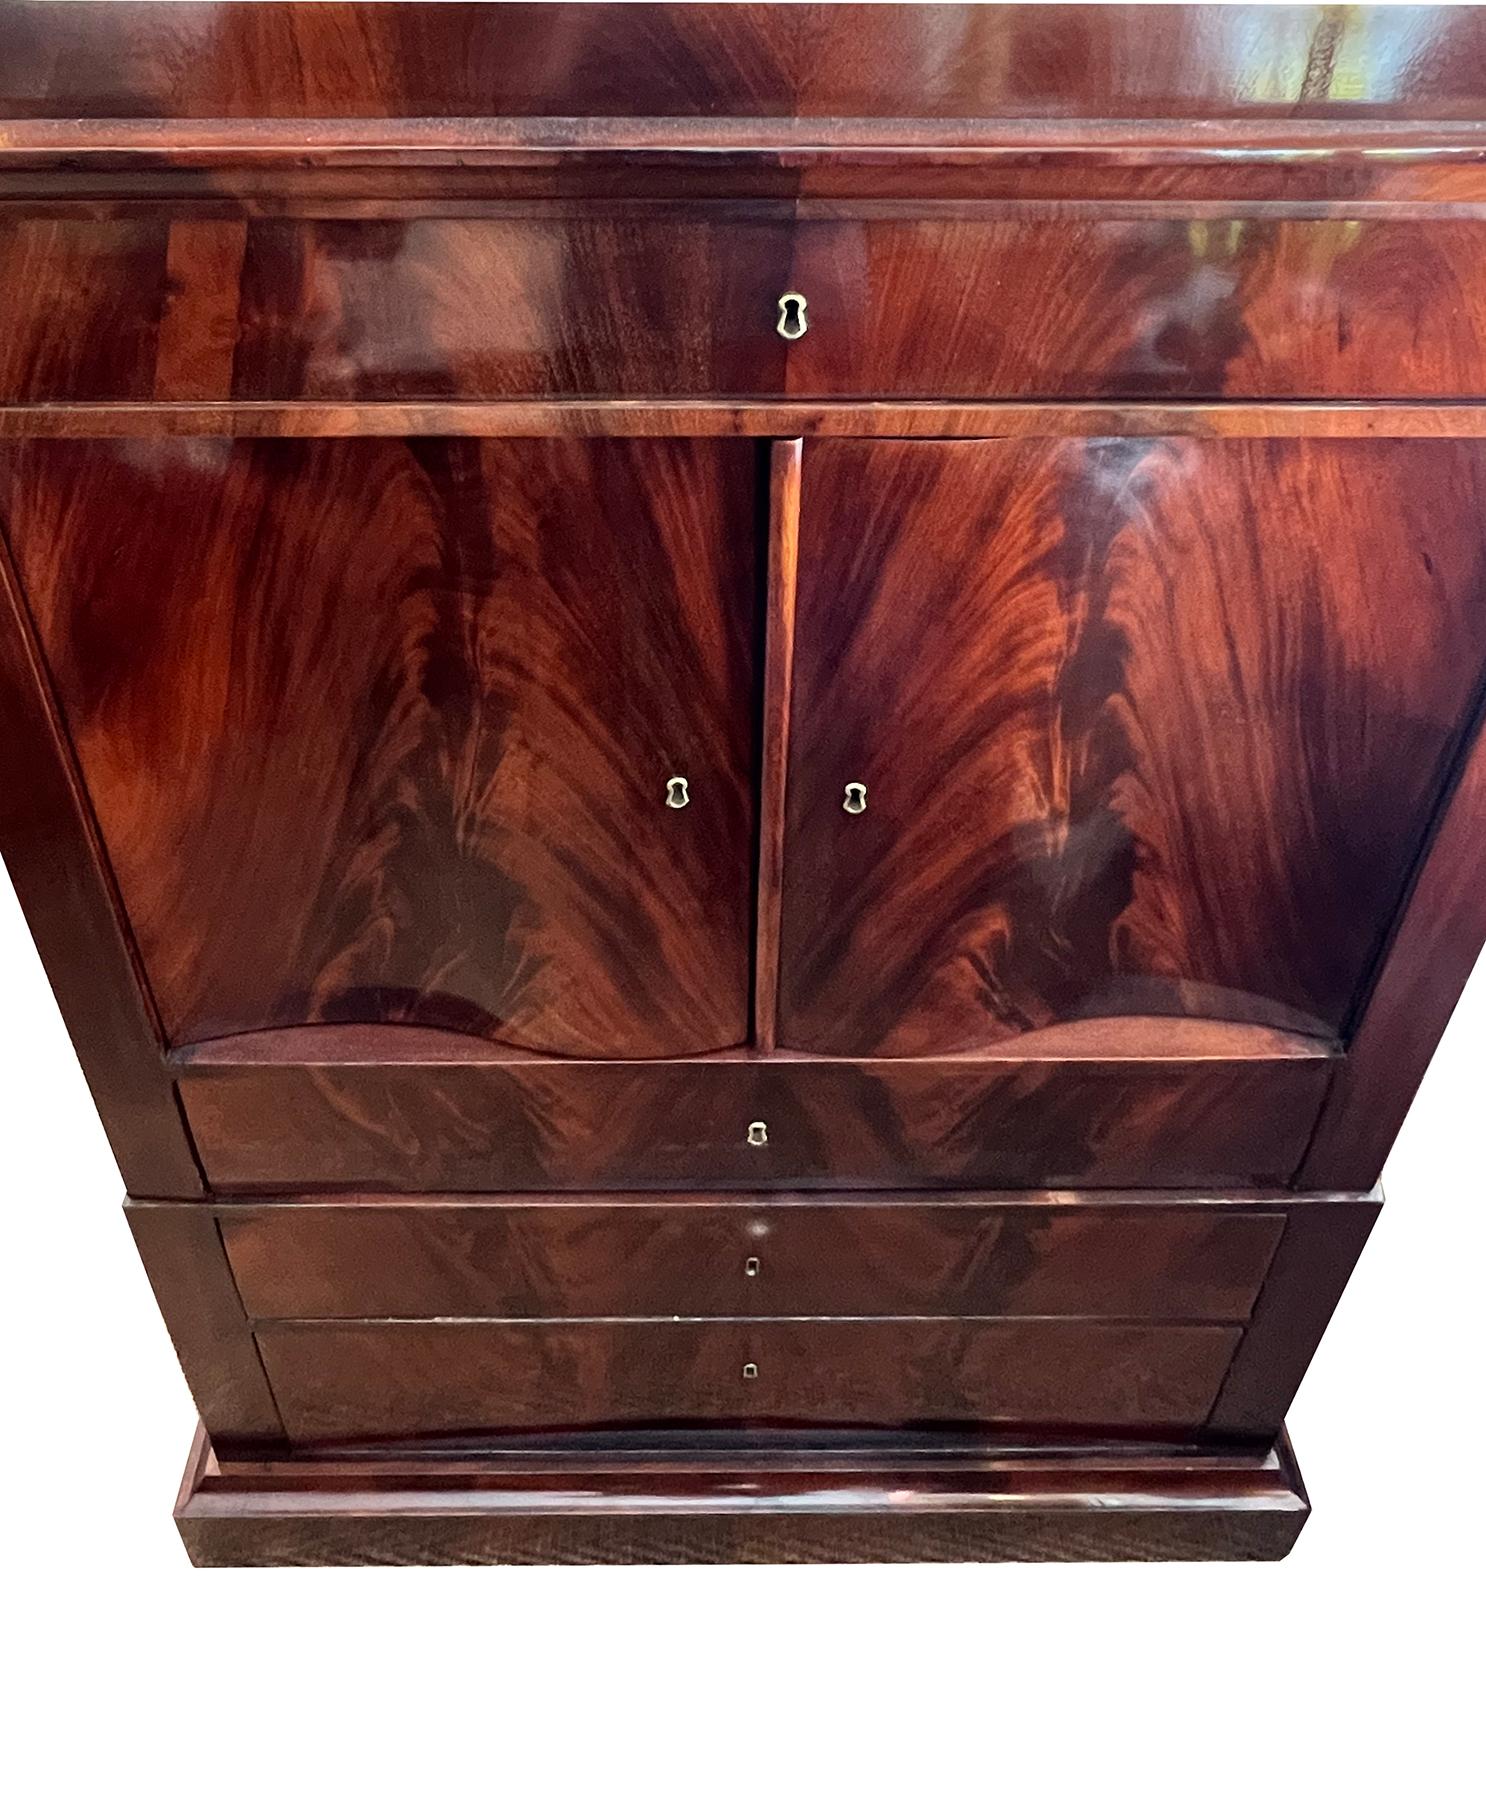 Danish Empire Tall Chest of Drawers in Book-Matched Flame Mahogany Veneer For Sale 1